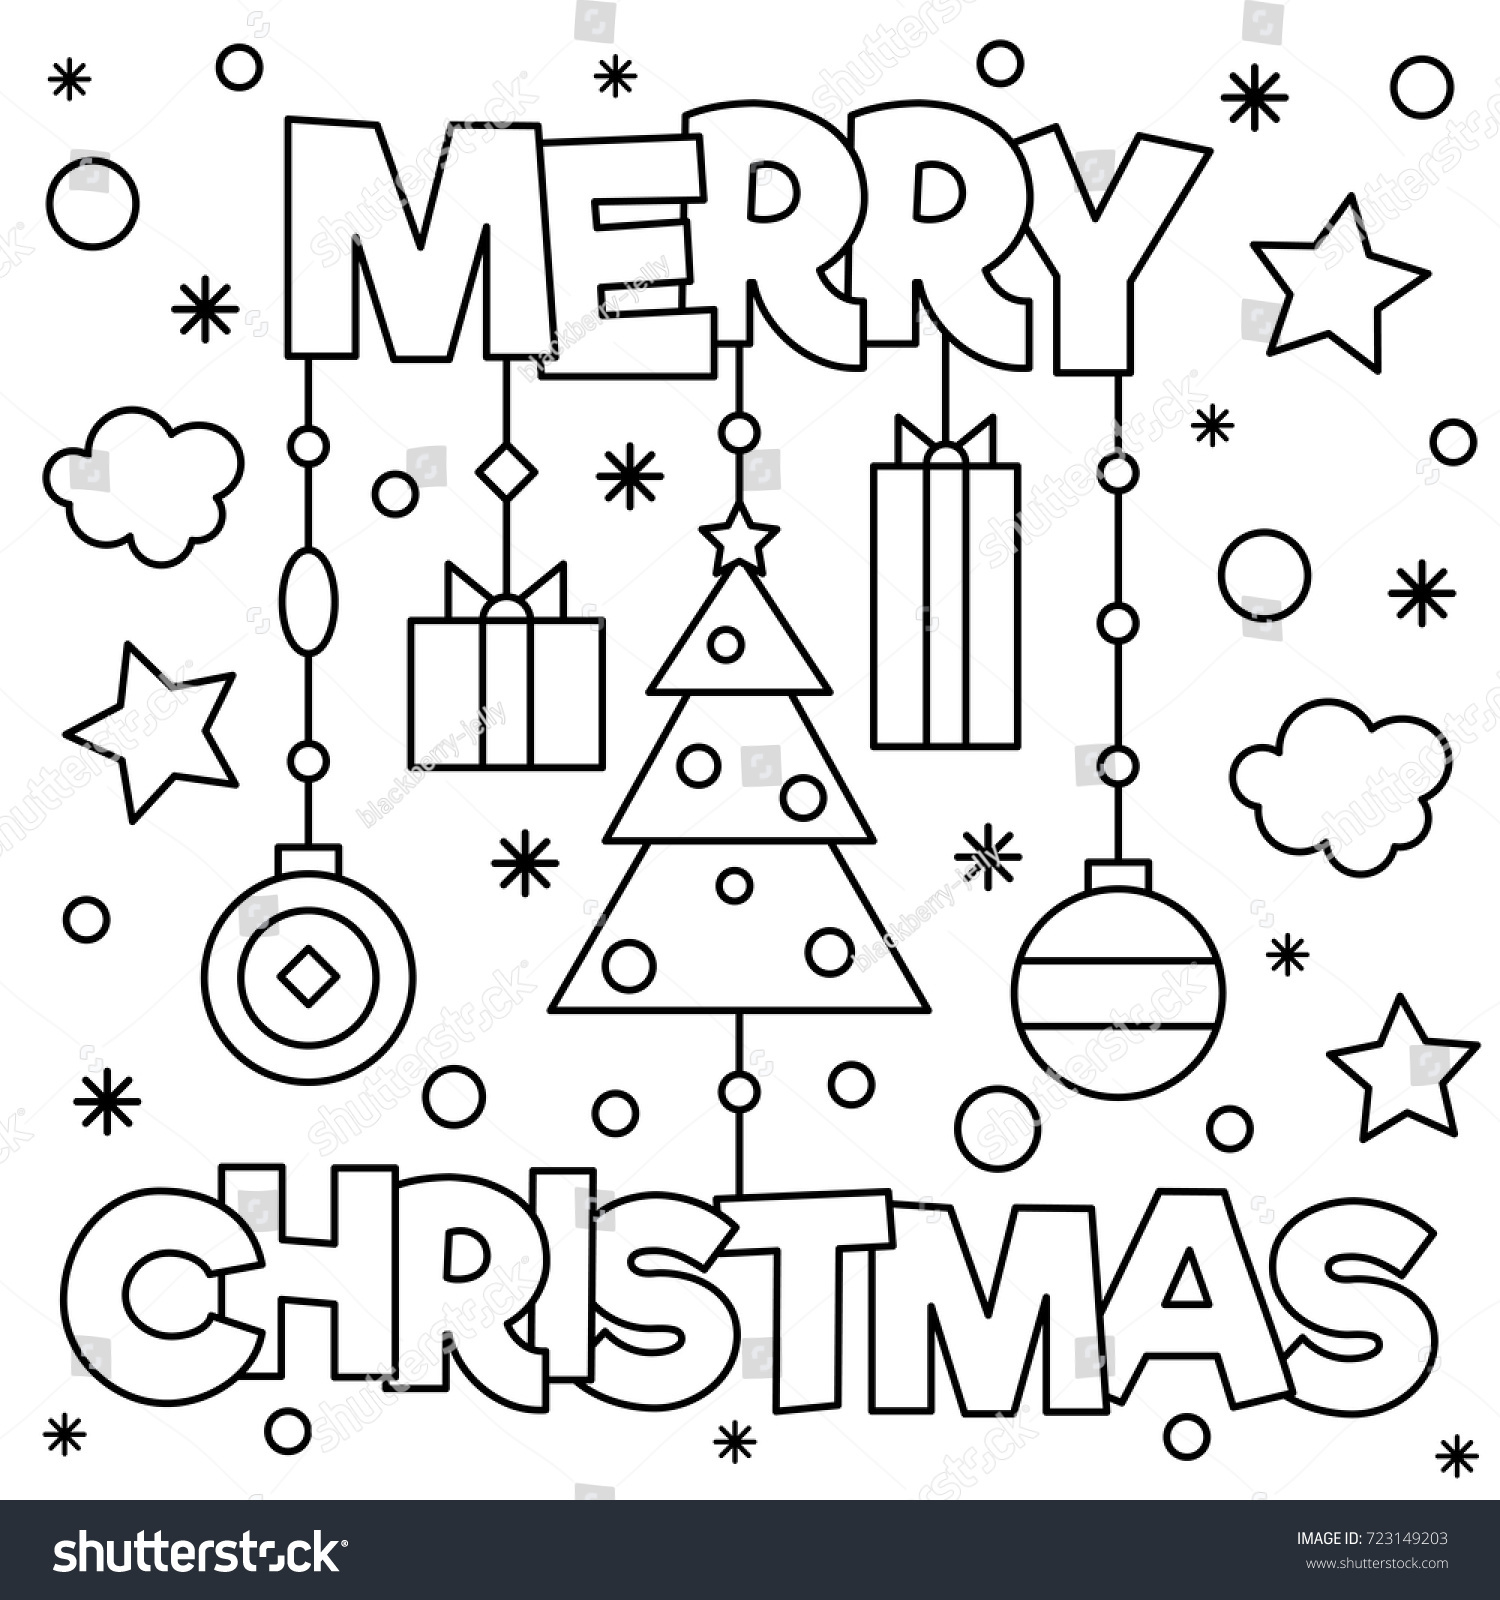 Merry Christmas Coloring page Vector illustration